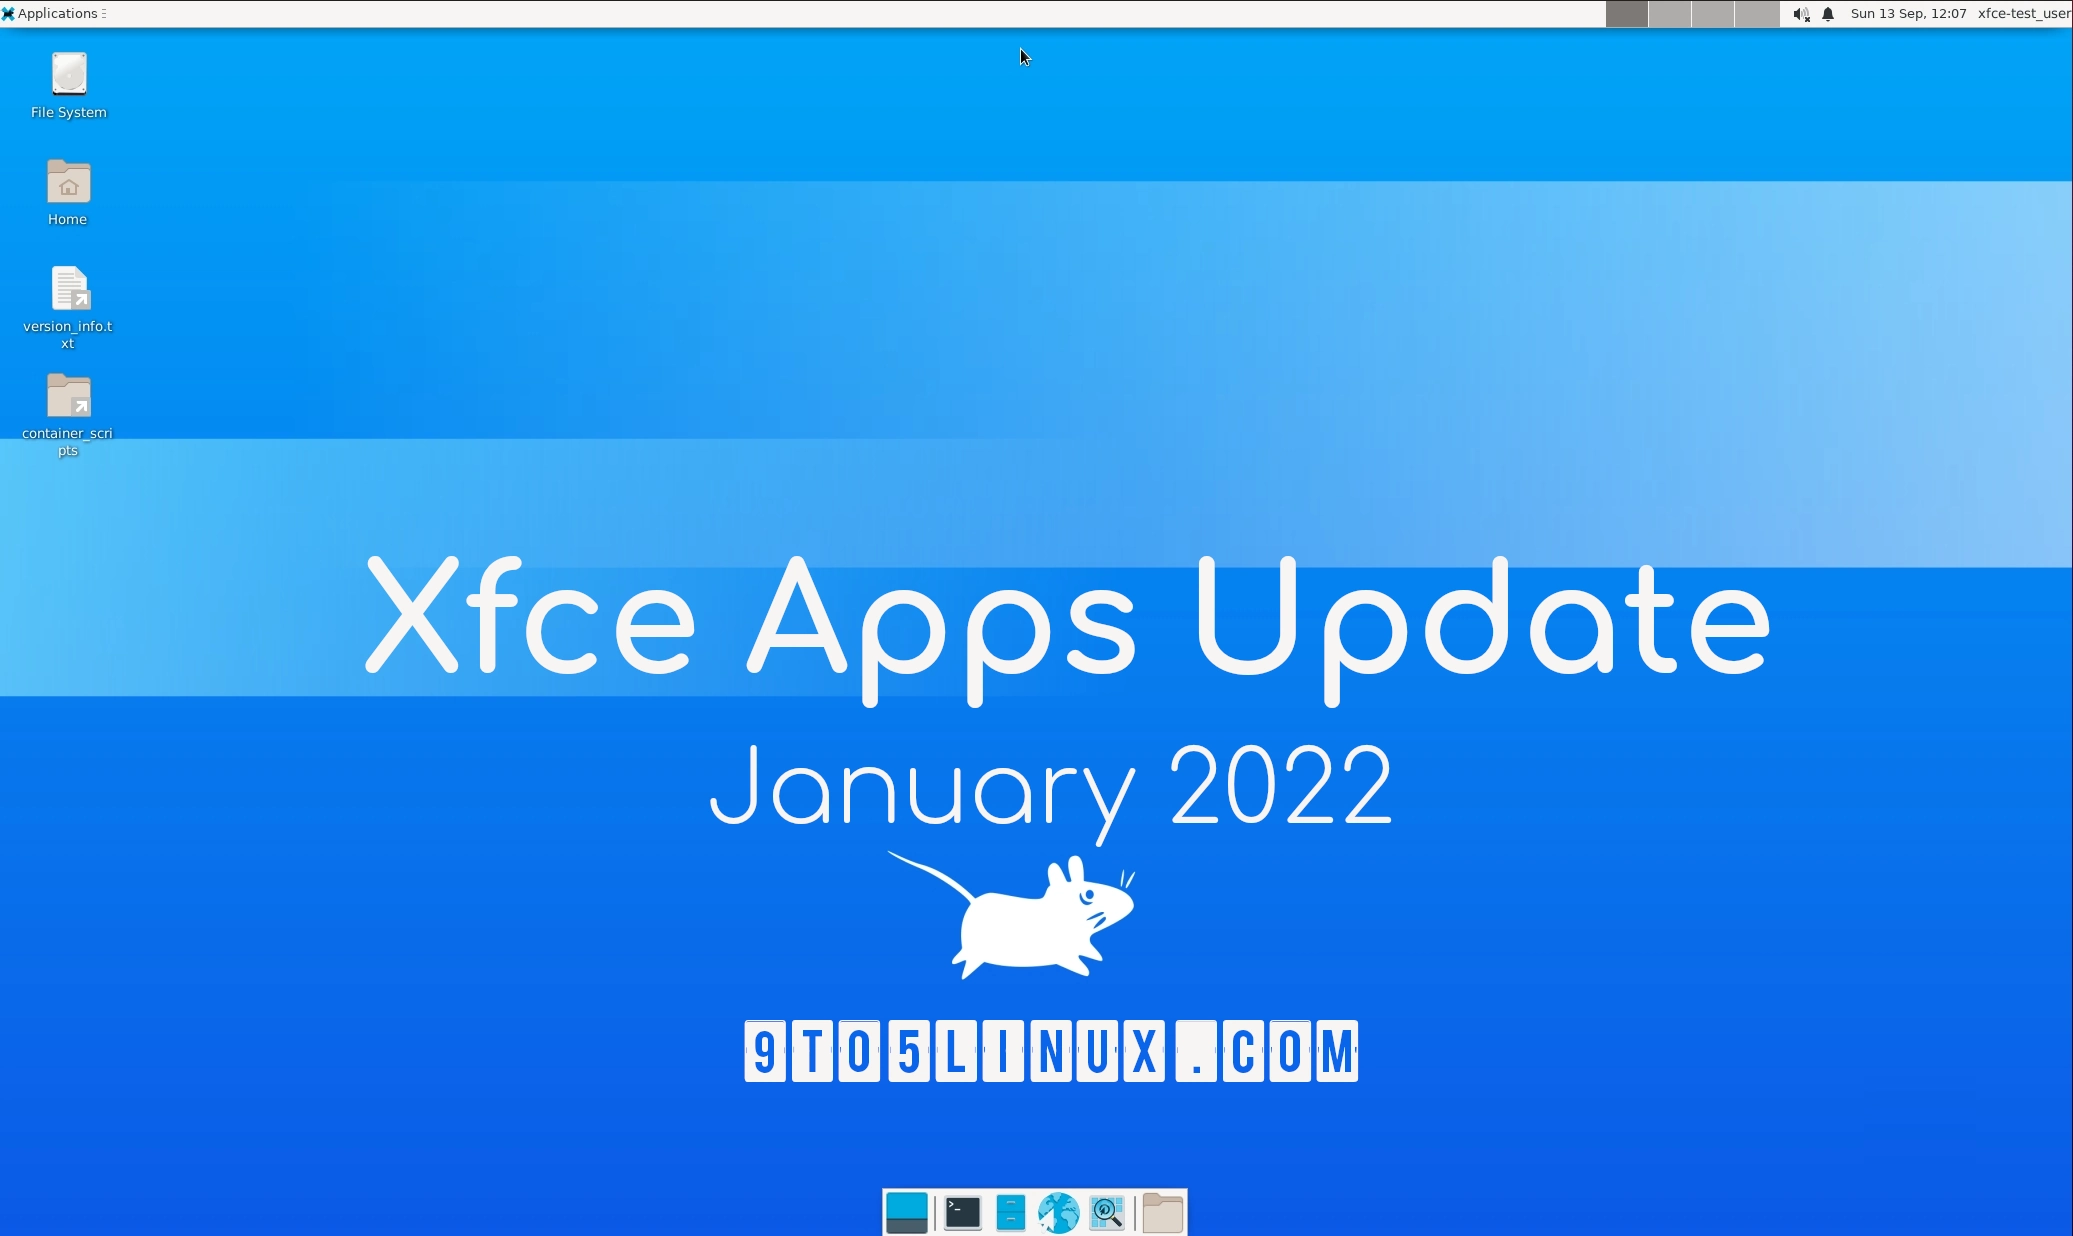 Xfce’s Apps Update for January 2022: New Releases of Ristretto, CPU Freq Plugin, and More